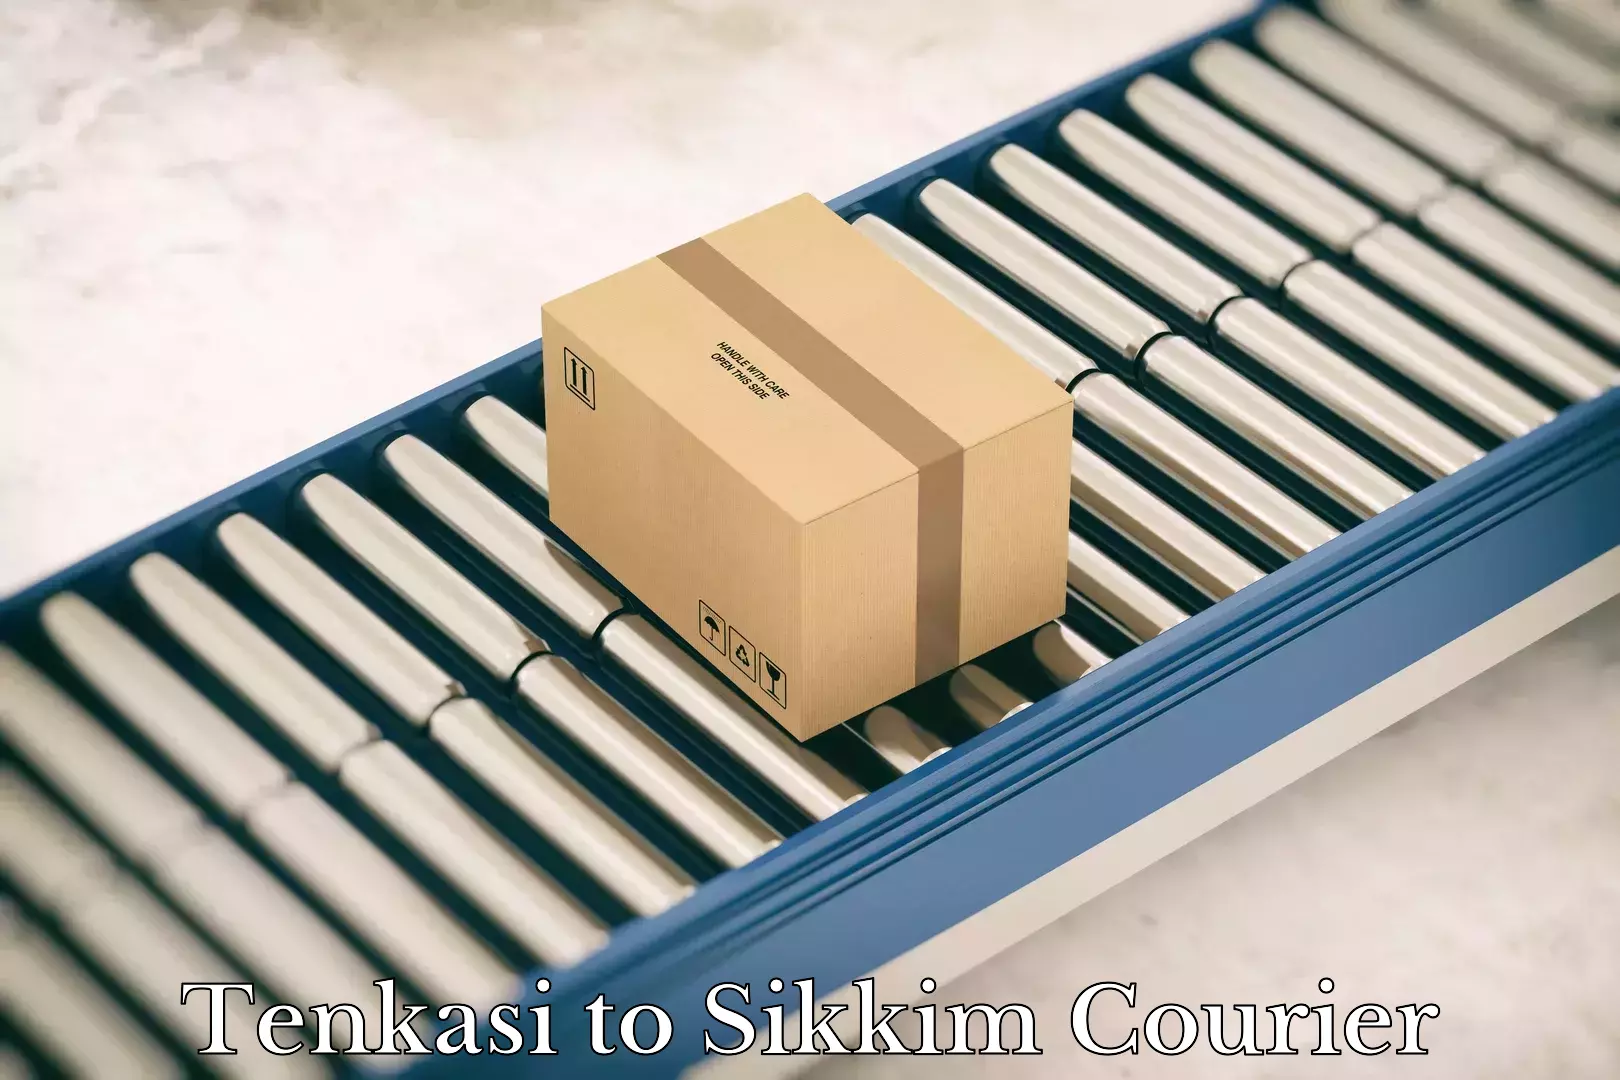 Subscription-based courier Tenkasi to Sikkim